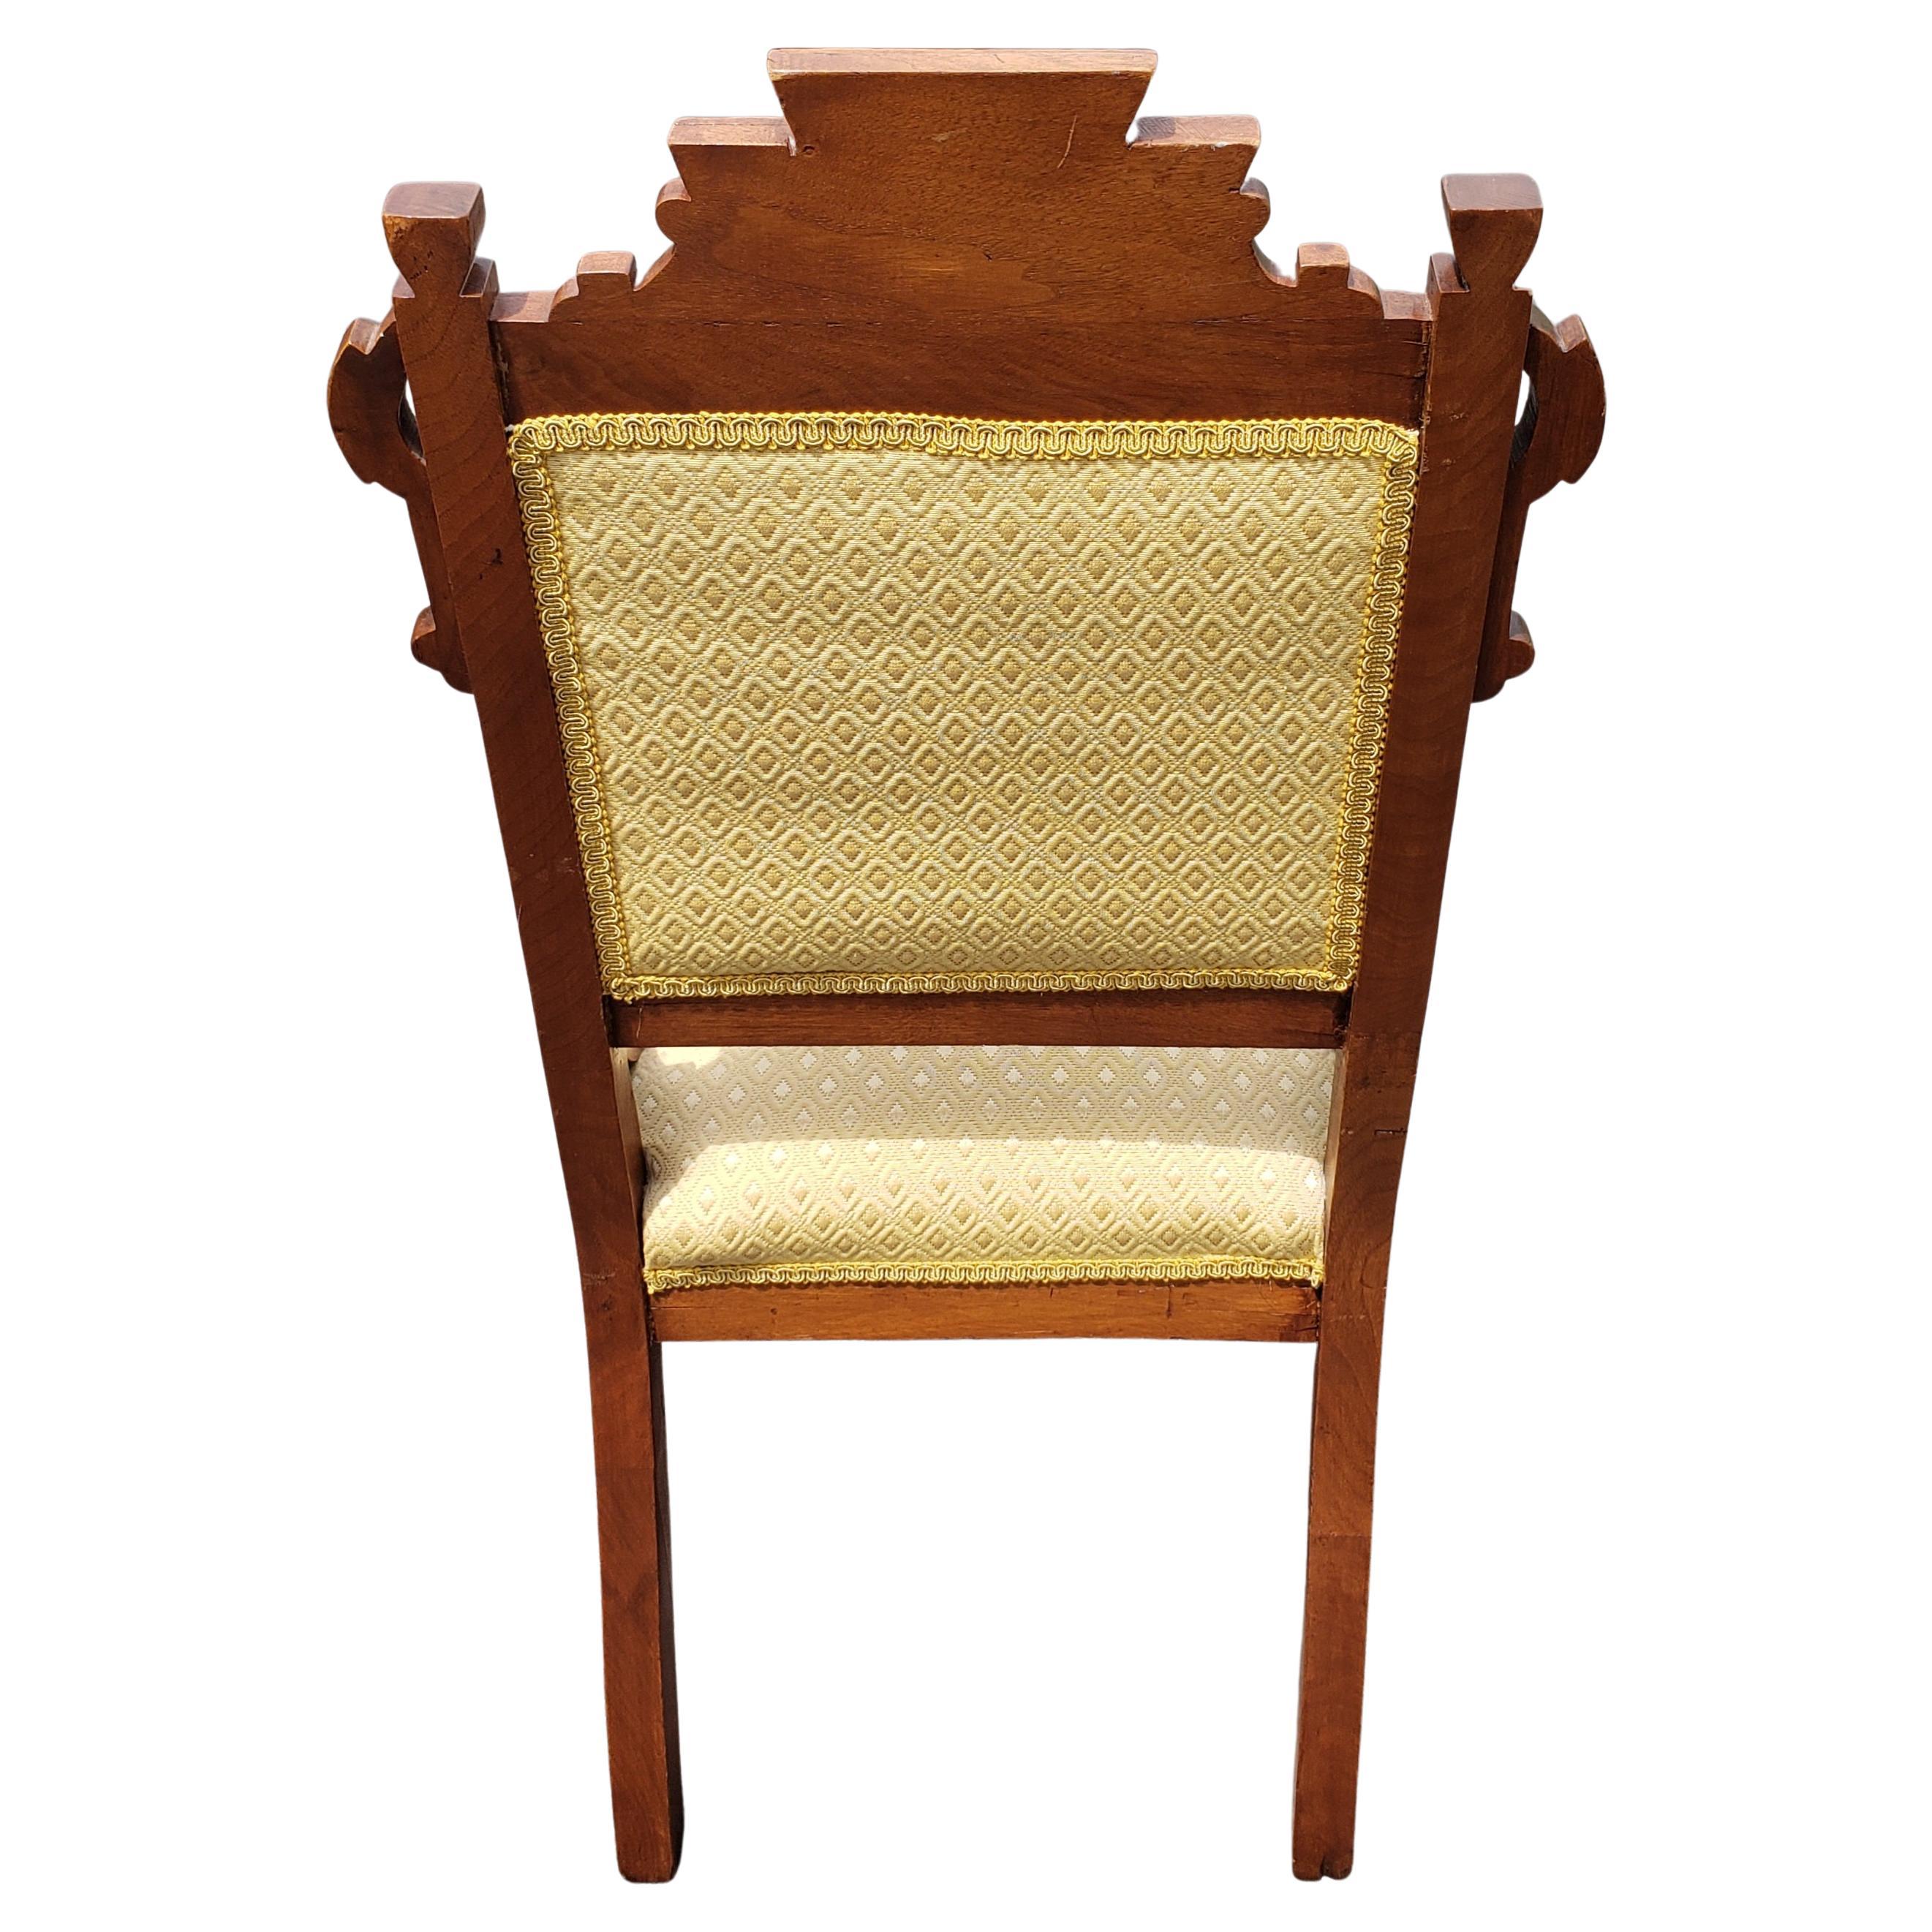 Antique Victorian Walnut Upholstered Tufted Parlor Chair, Circa 1880s In Good Condition For Sale In Germantown, MD